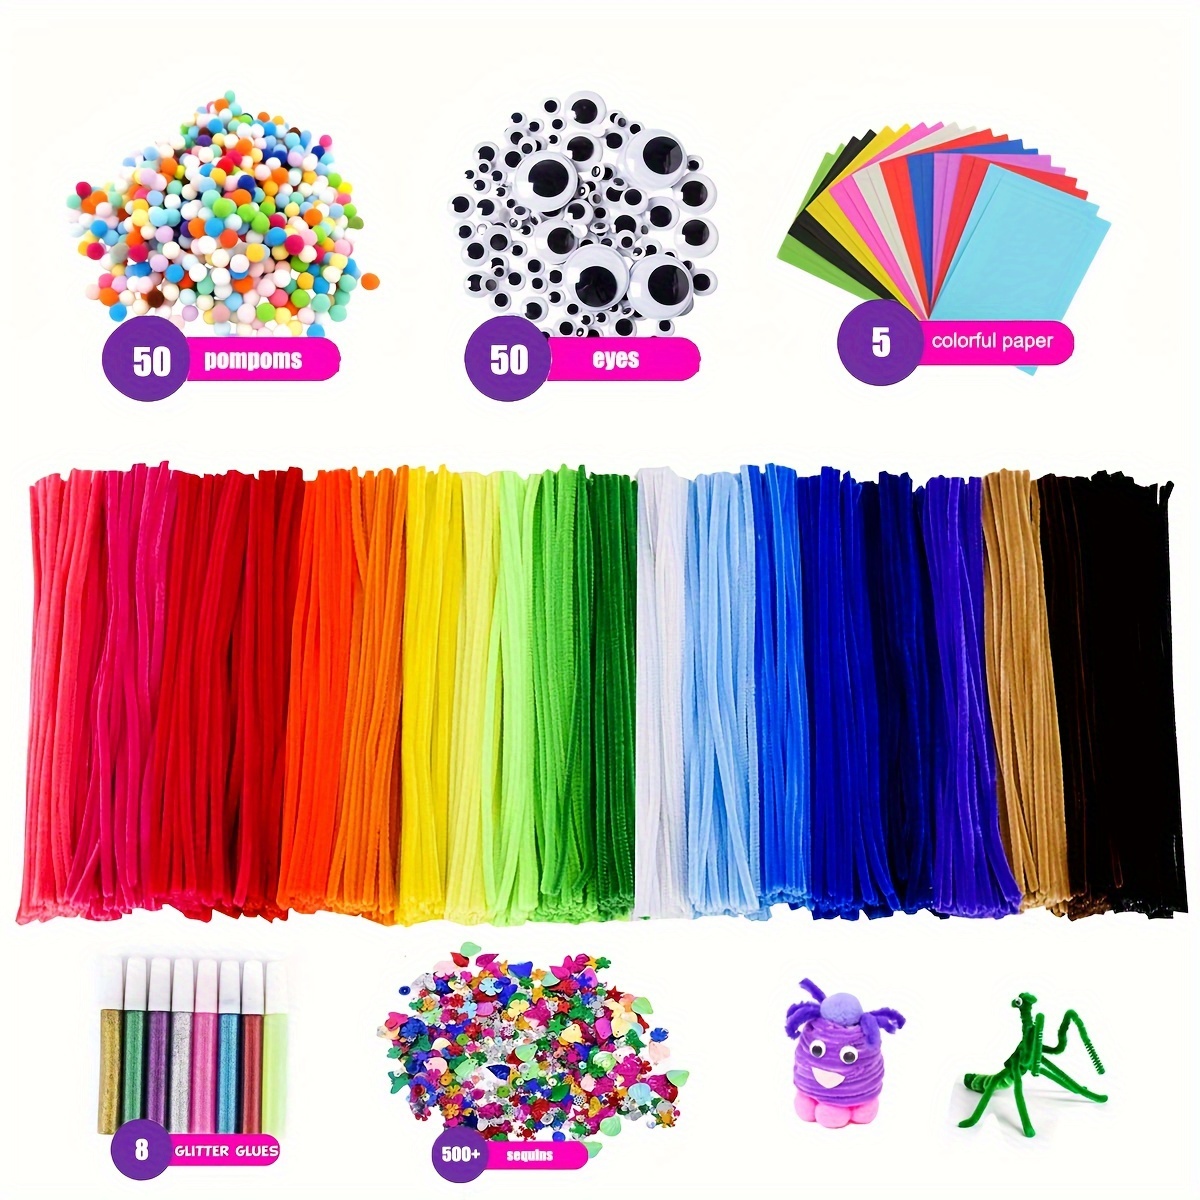 50/100pcs Glitter Chenille Stems Pipe Cleaners Plush Tinsel Stems Wired  Sticks Kids Educational DIY Craft Supplies Toys Craf